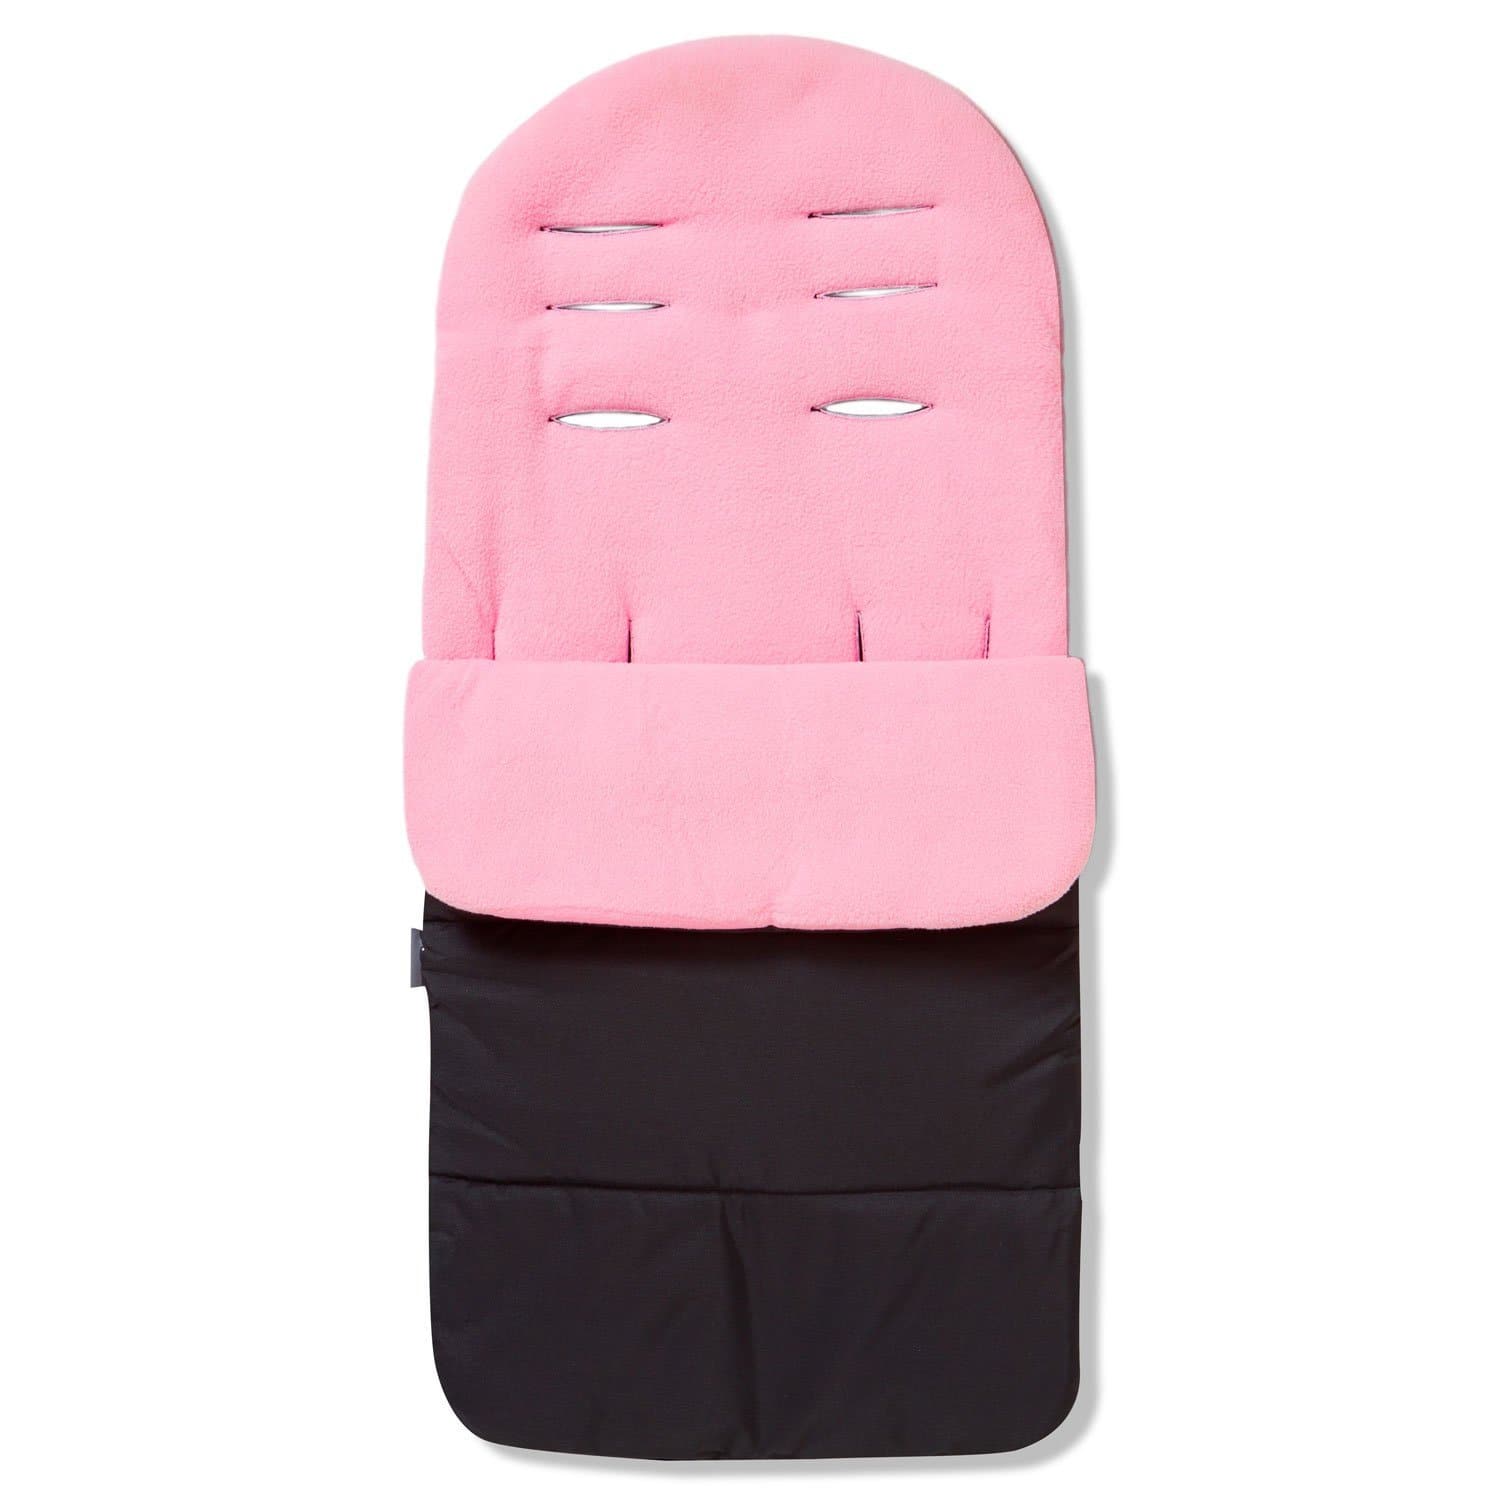 Premium Footmuff / Cosy Toes Compatible with Quinny - Candy Pink / Fits All Models | For Your Little One